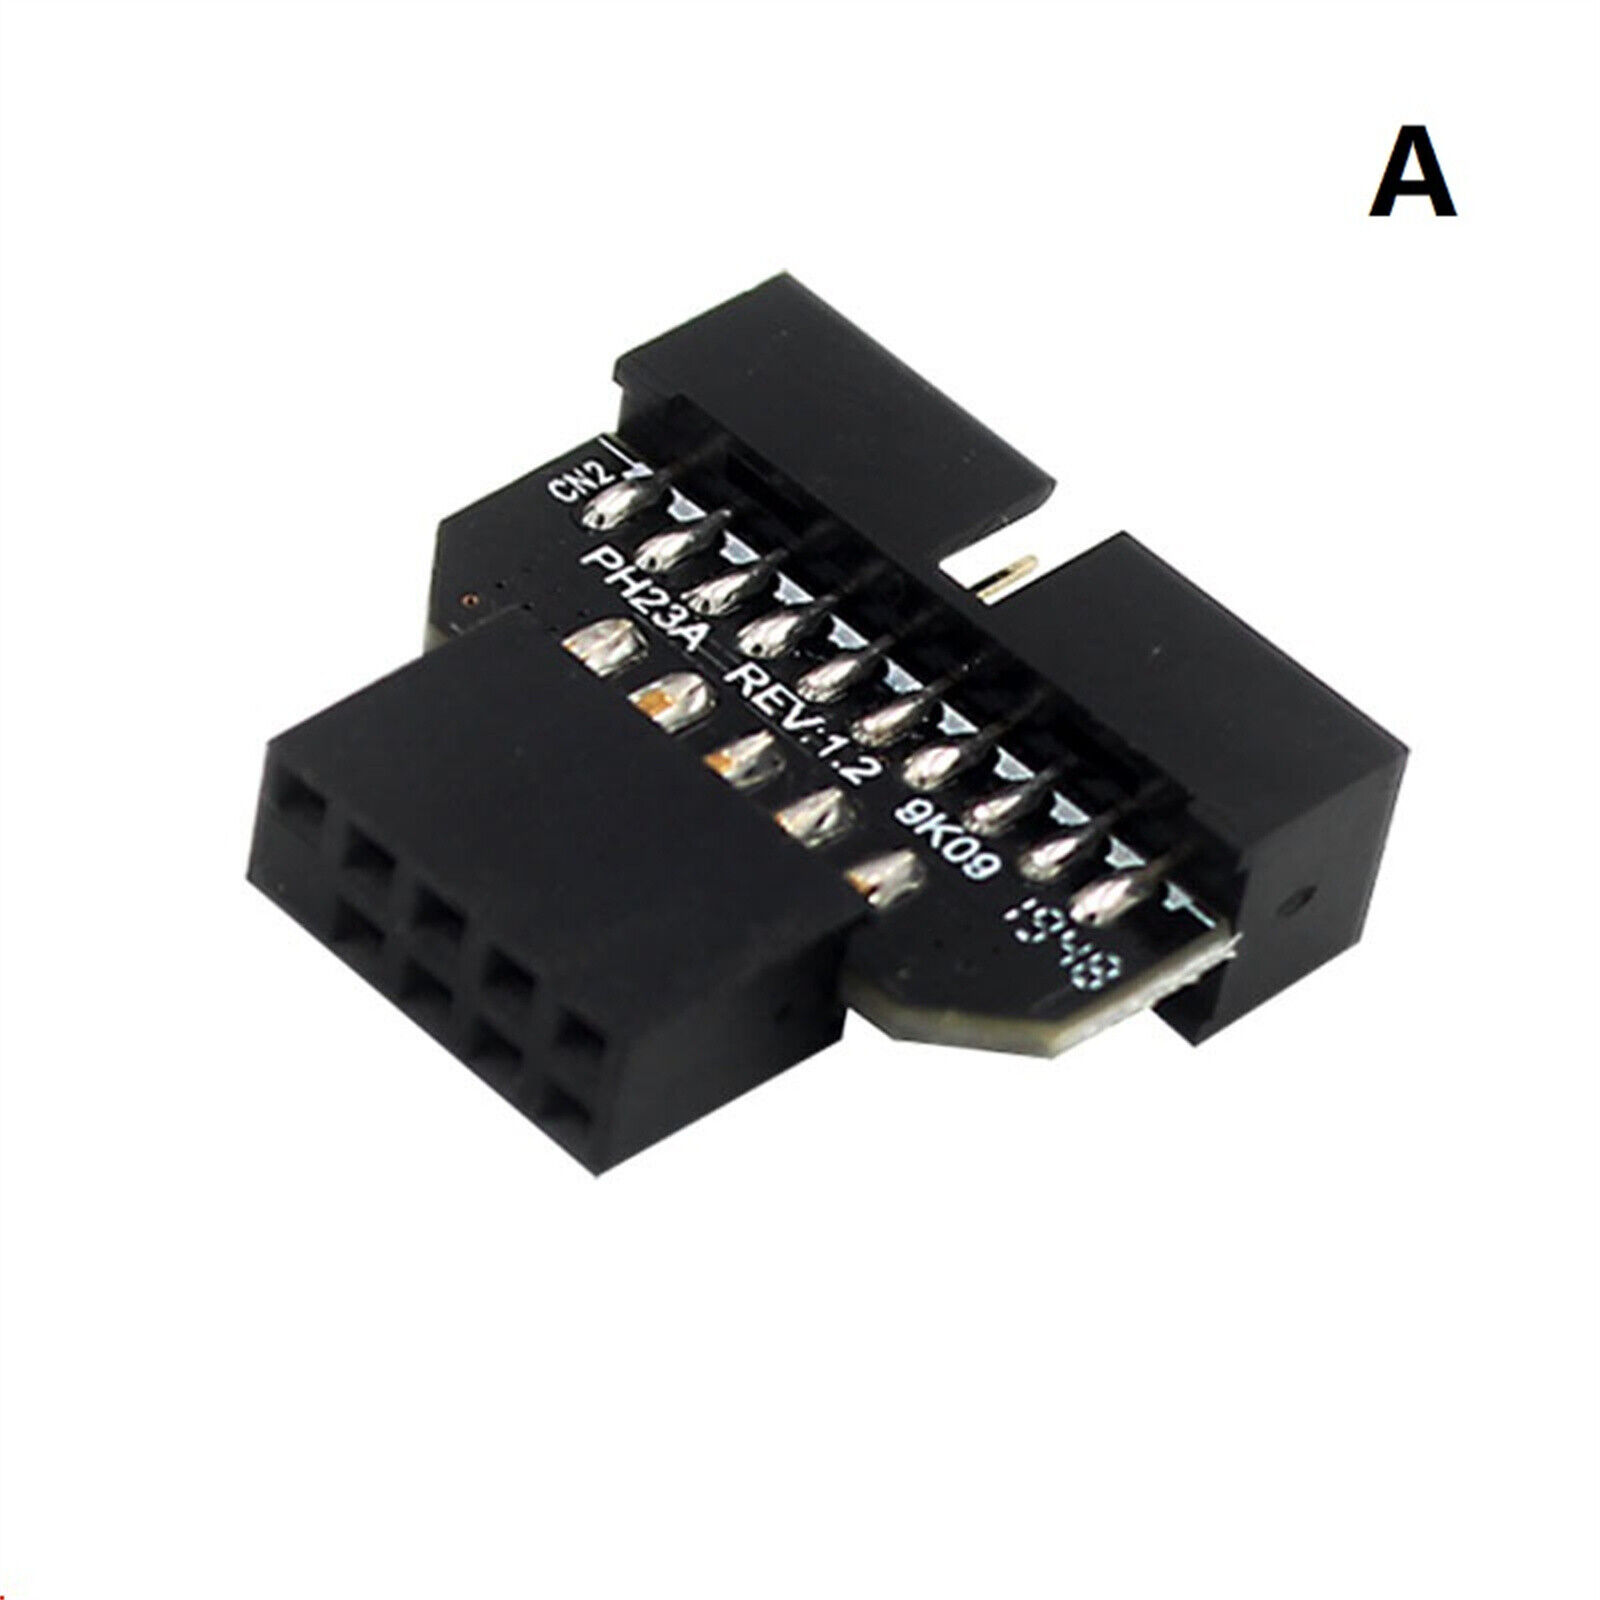 Front Panel Plug Connector USB3.0 19-pin To USB2.0 9-Pin Adapter For Motherboard